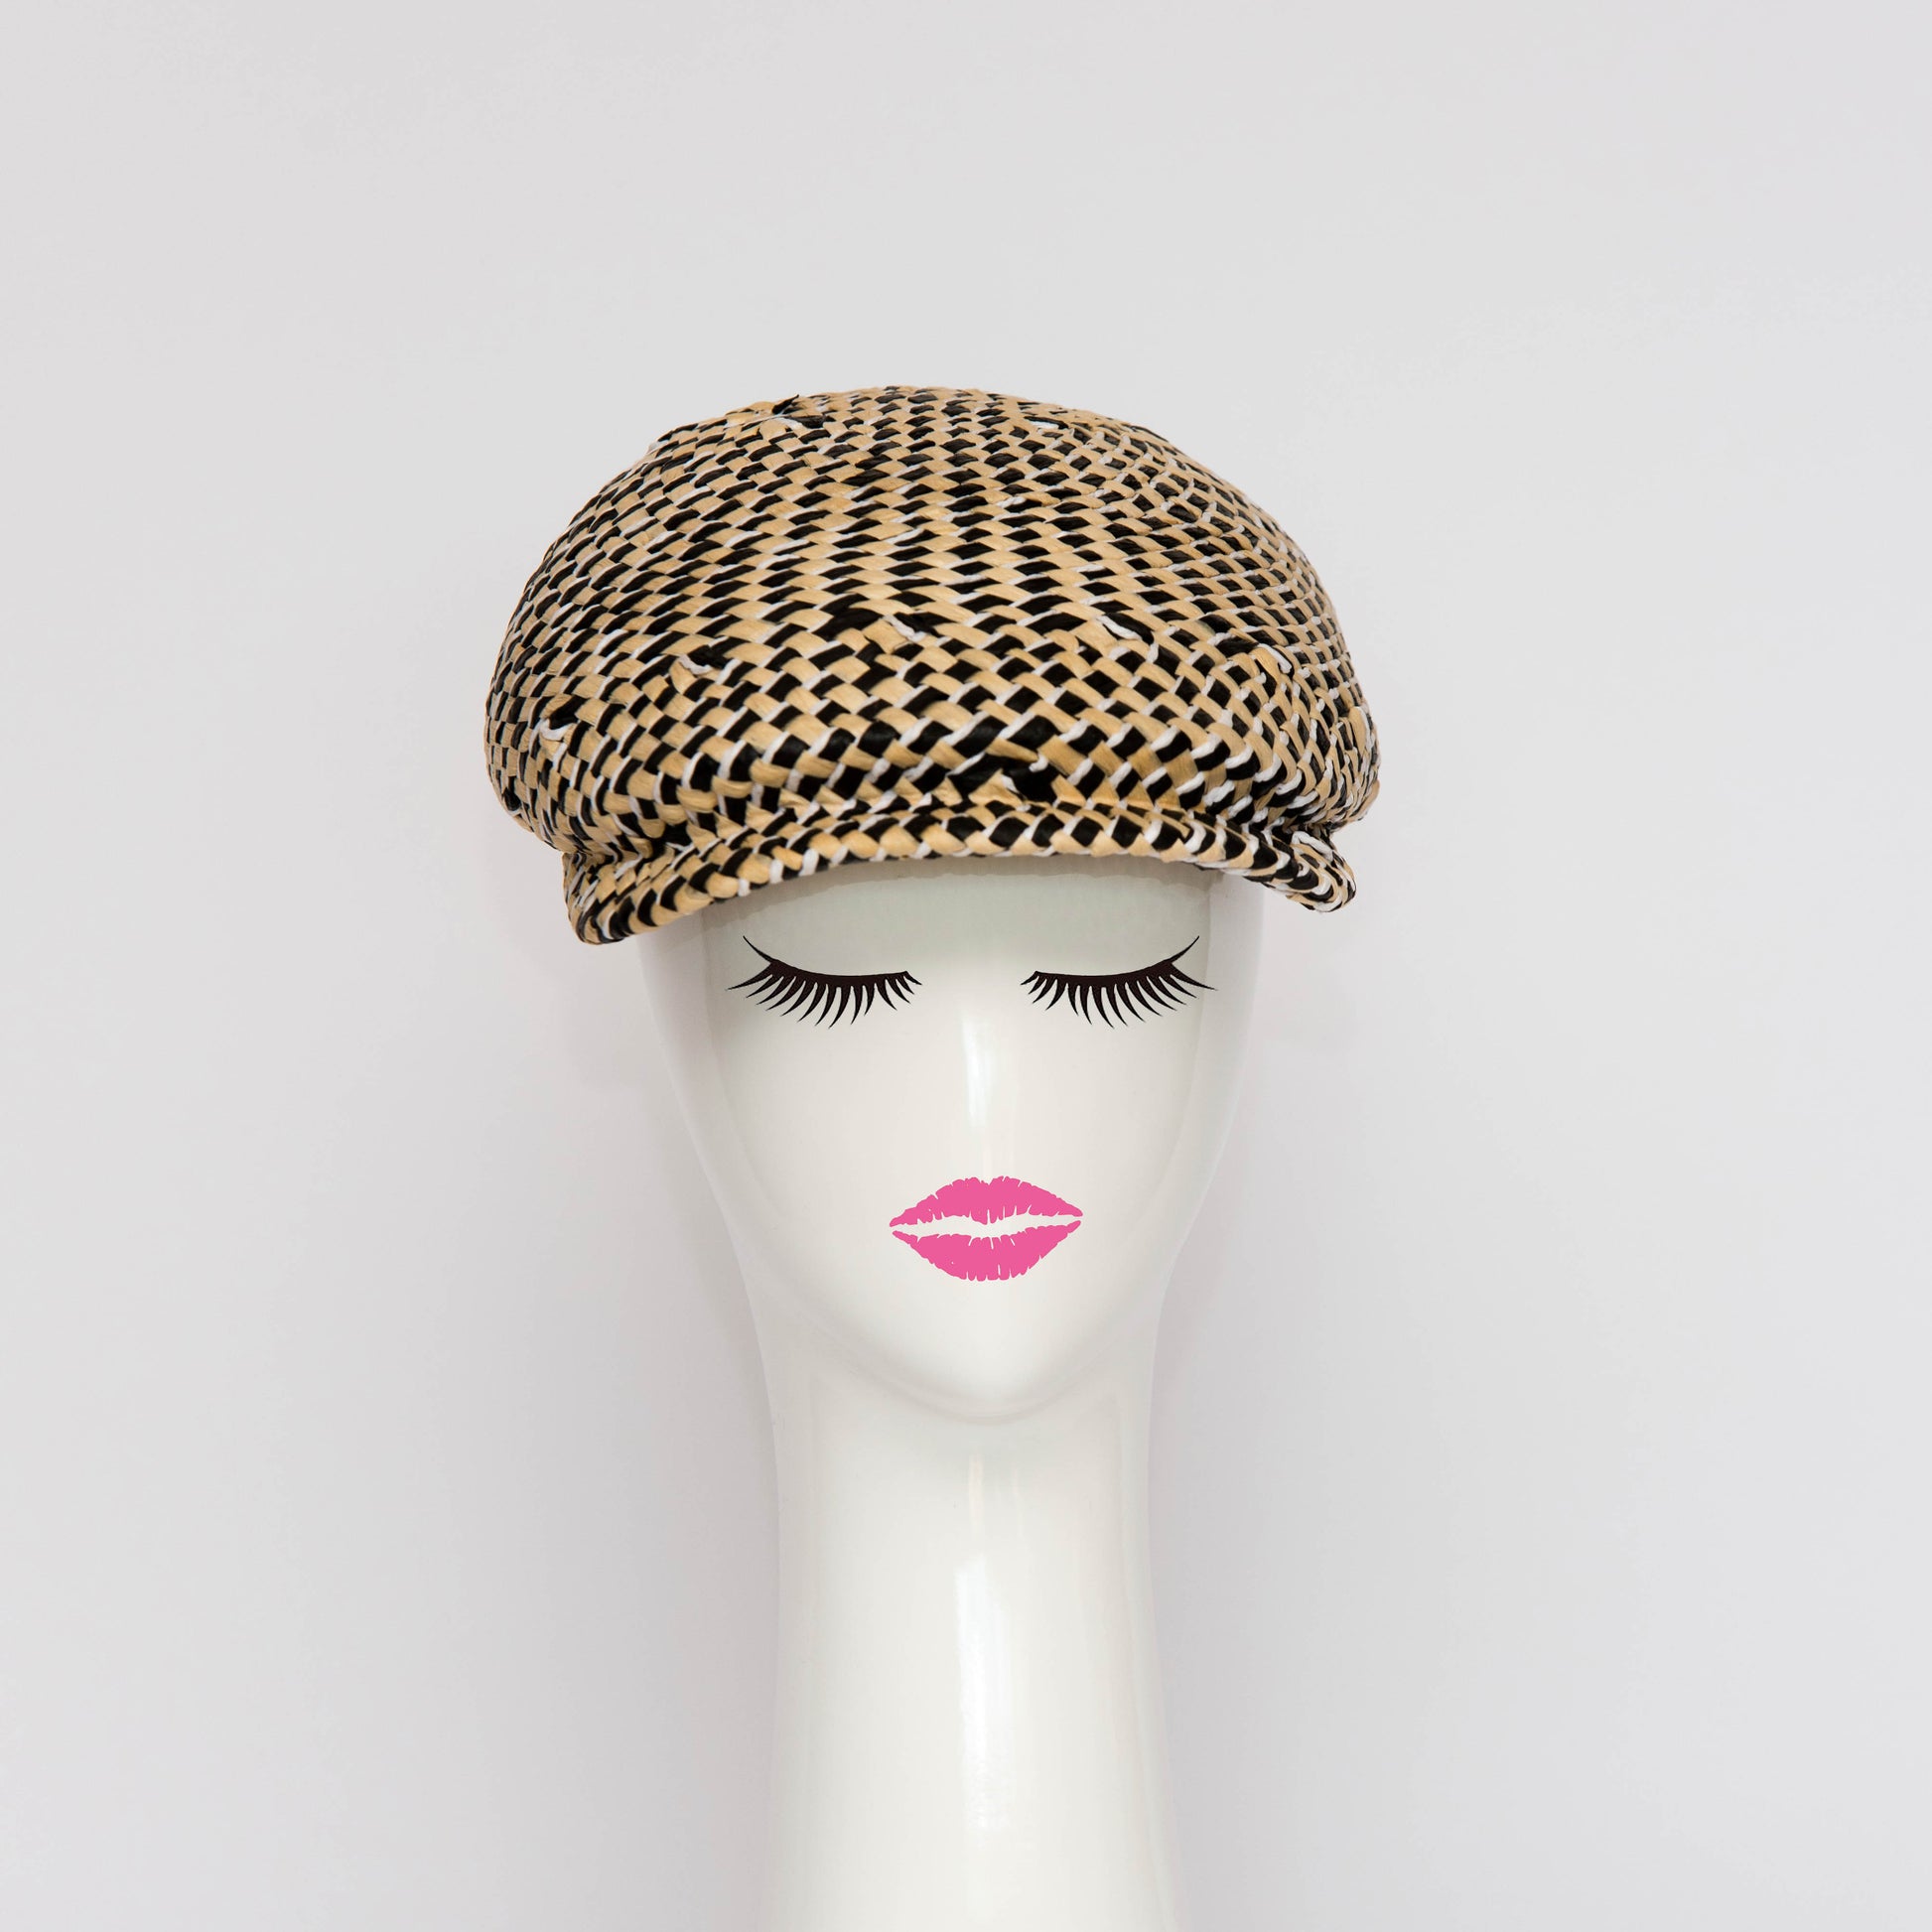 The Egan Cap is a modern all in one blocked cap.  The hat is made in a woven straw which provides a textured finish and variation in fibres.  Created by Melbourne based Lauren J Ritchie Millinery.